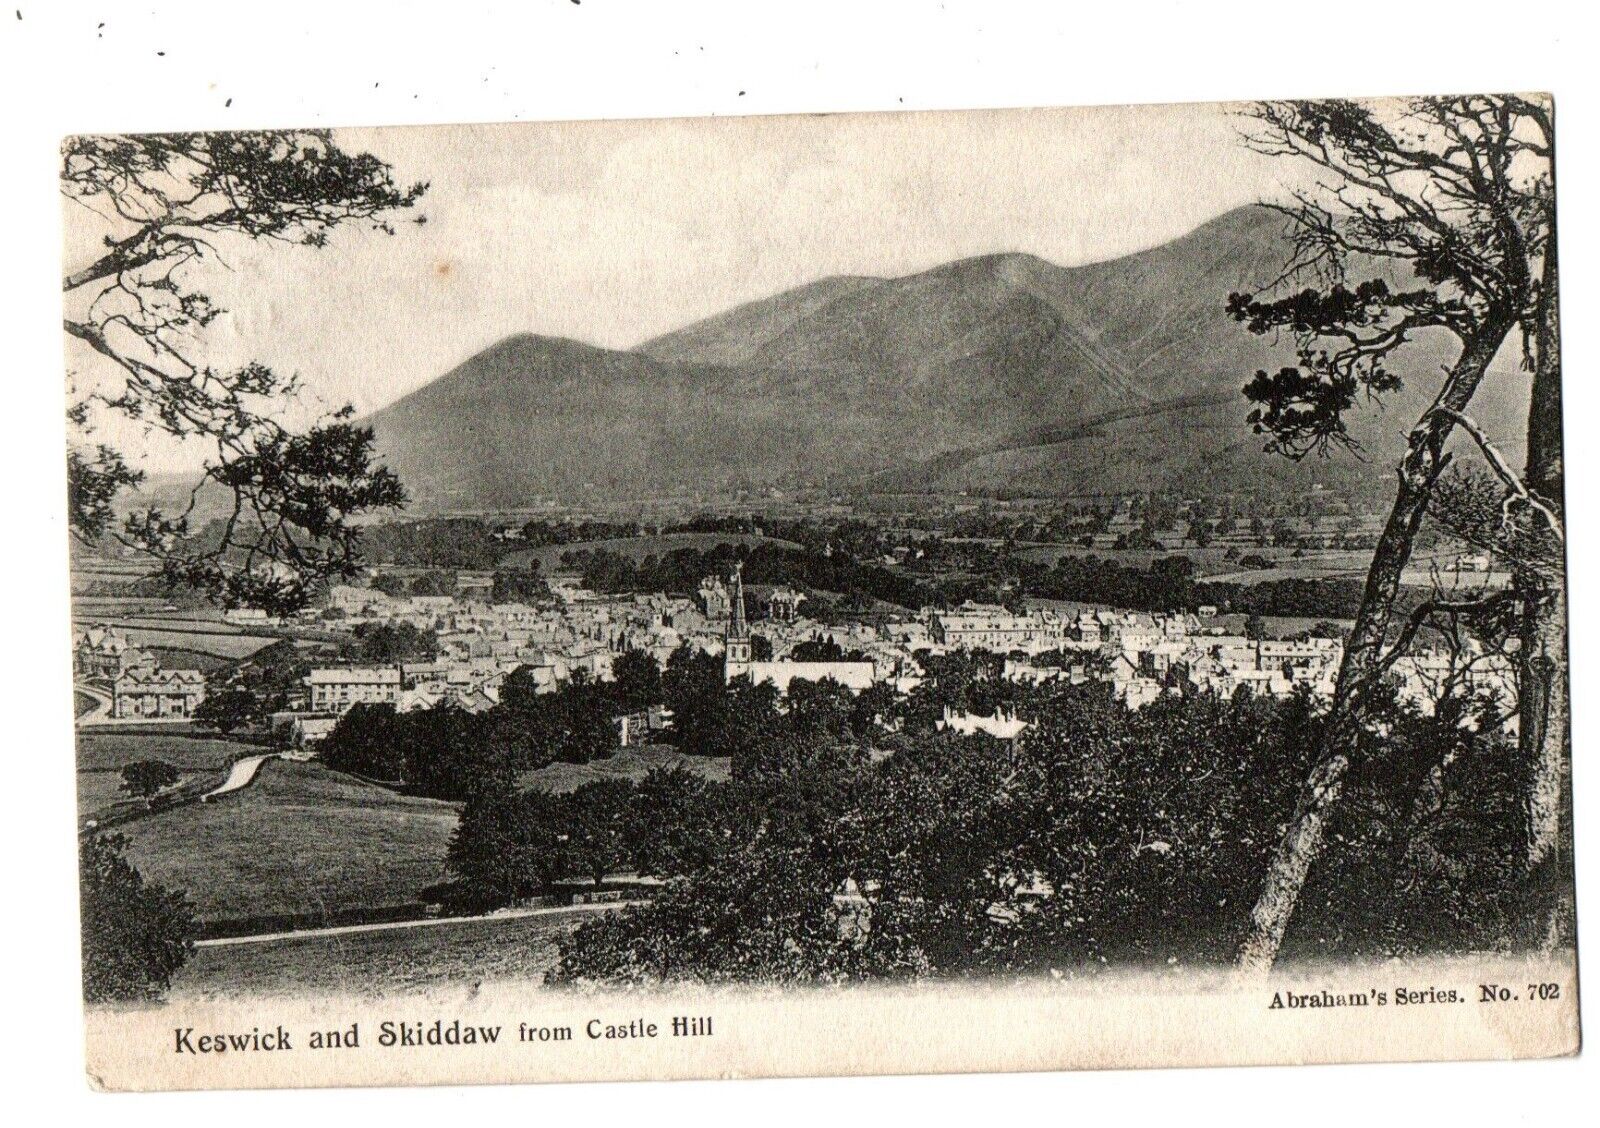 House Clearance - VIEW OF KESWICK FROM CHAPEL HILL - KESWICK - POSTED - " JR10 "